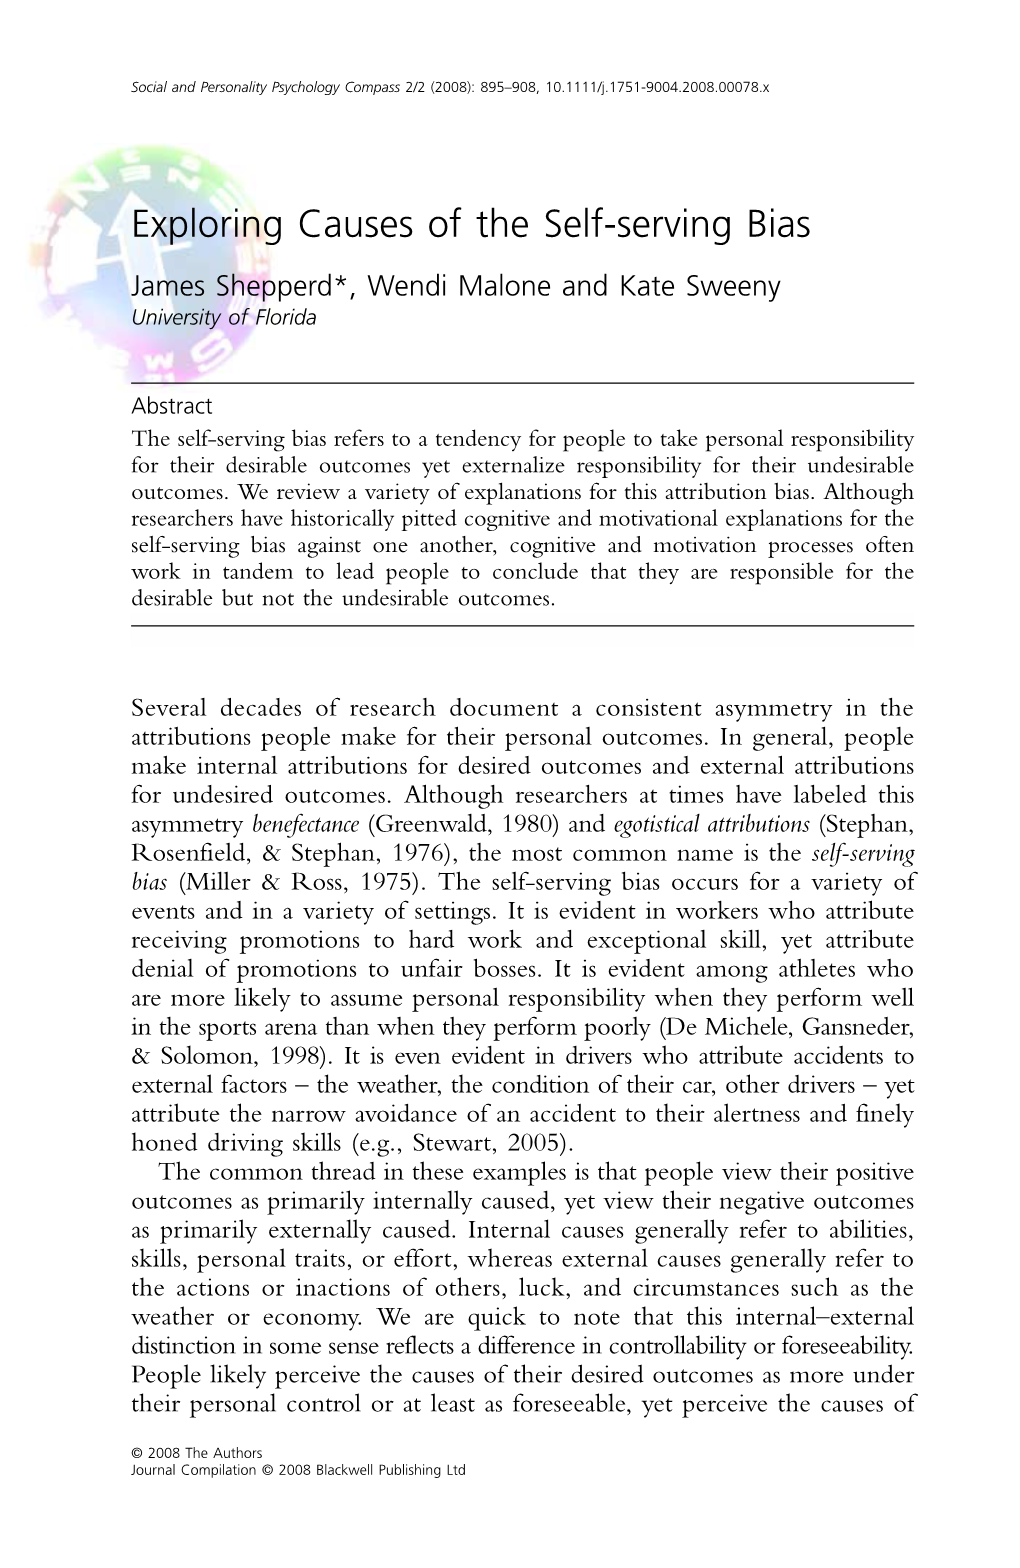 Exploring Causes of the Self-Serving Bias James Shepperd*, Wendi Malone and Kate Sweeny University of Florida